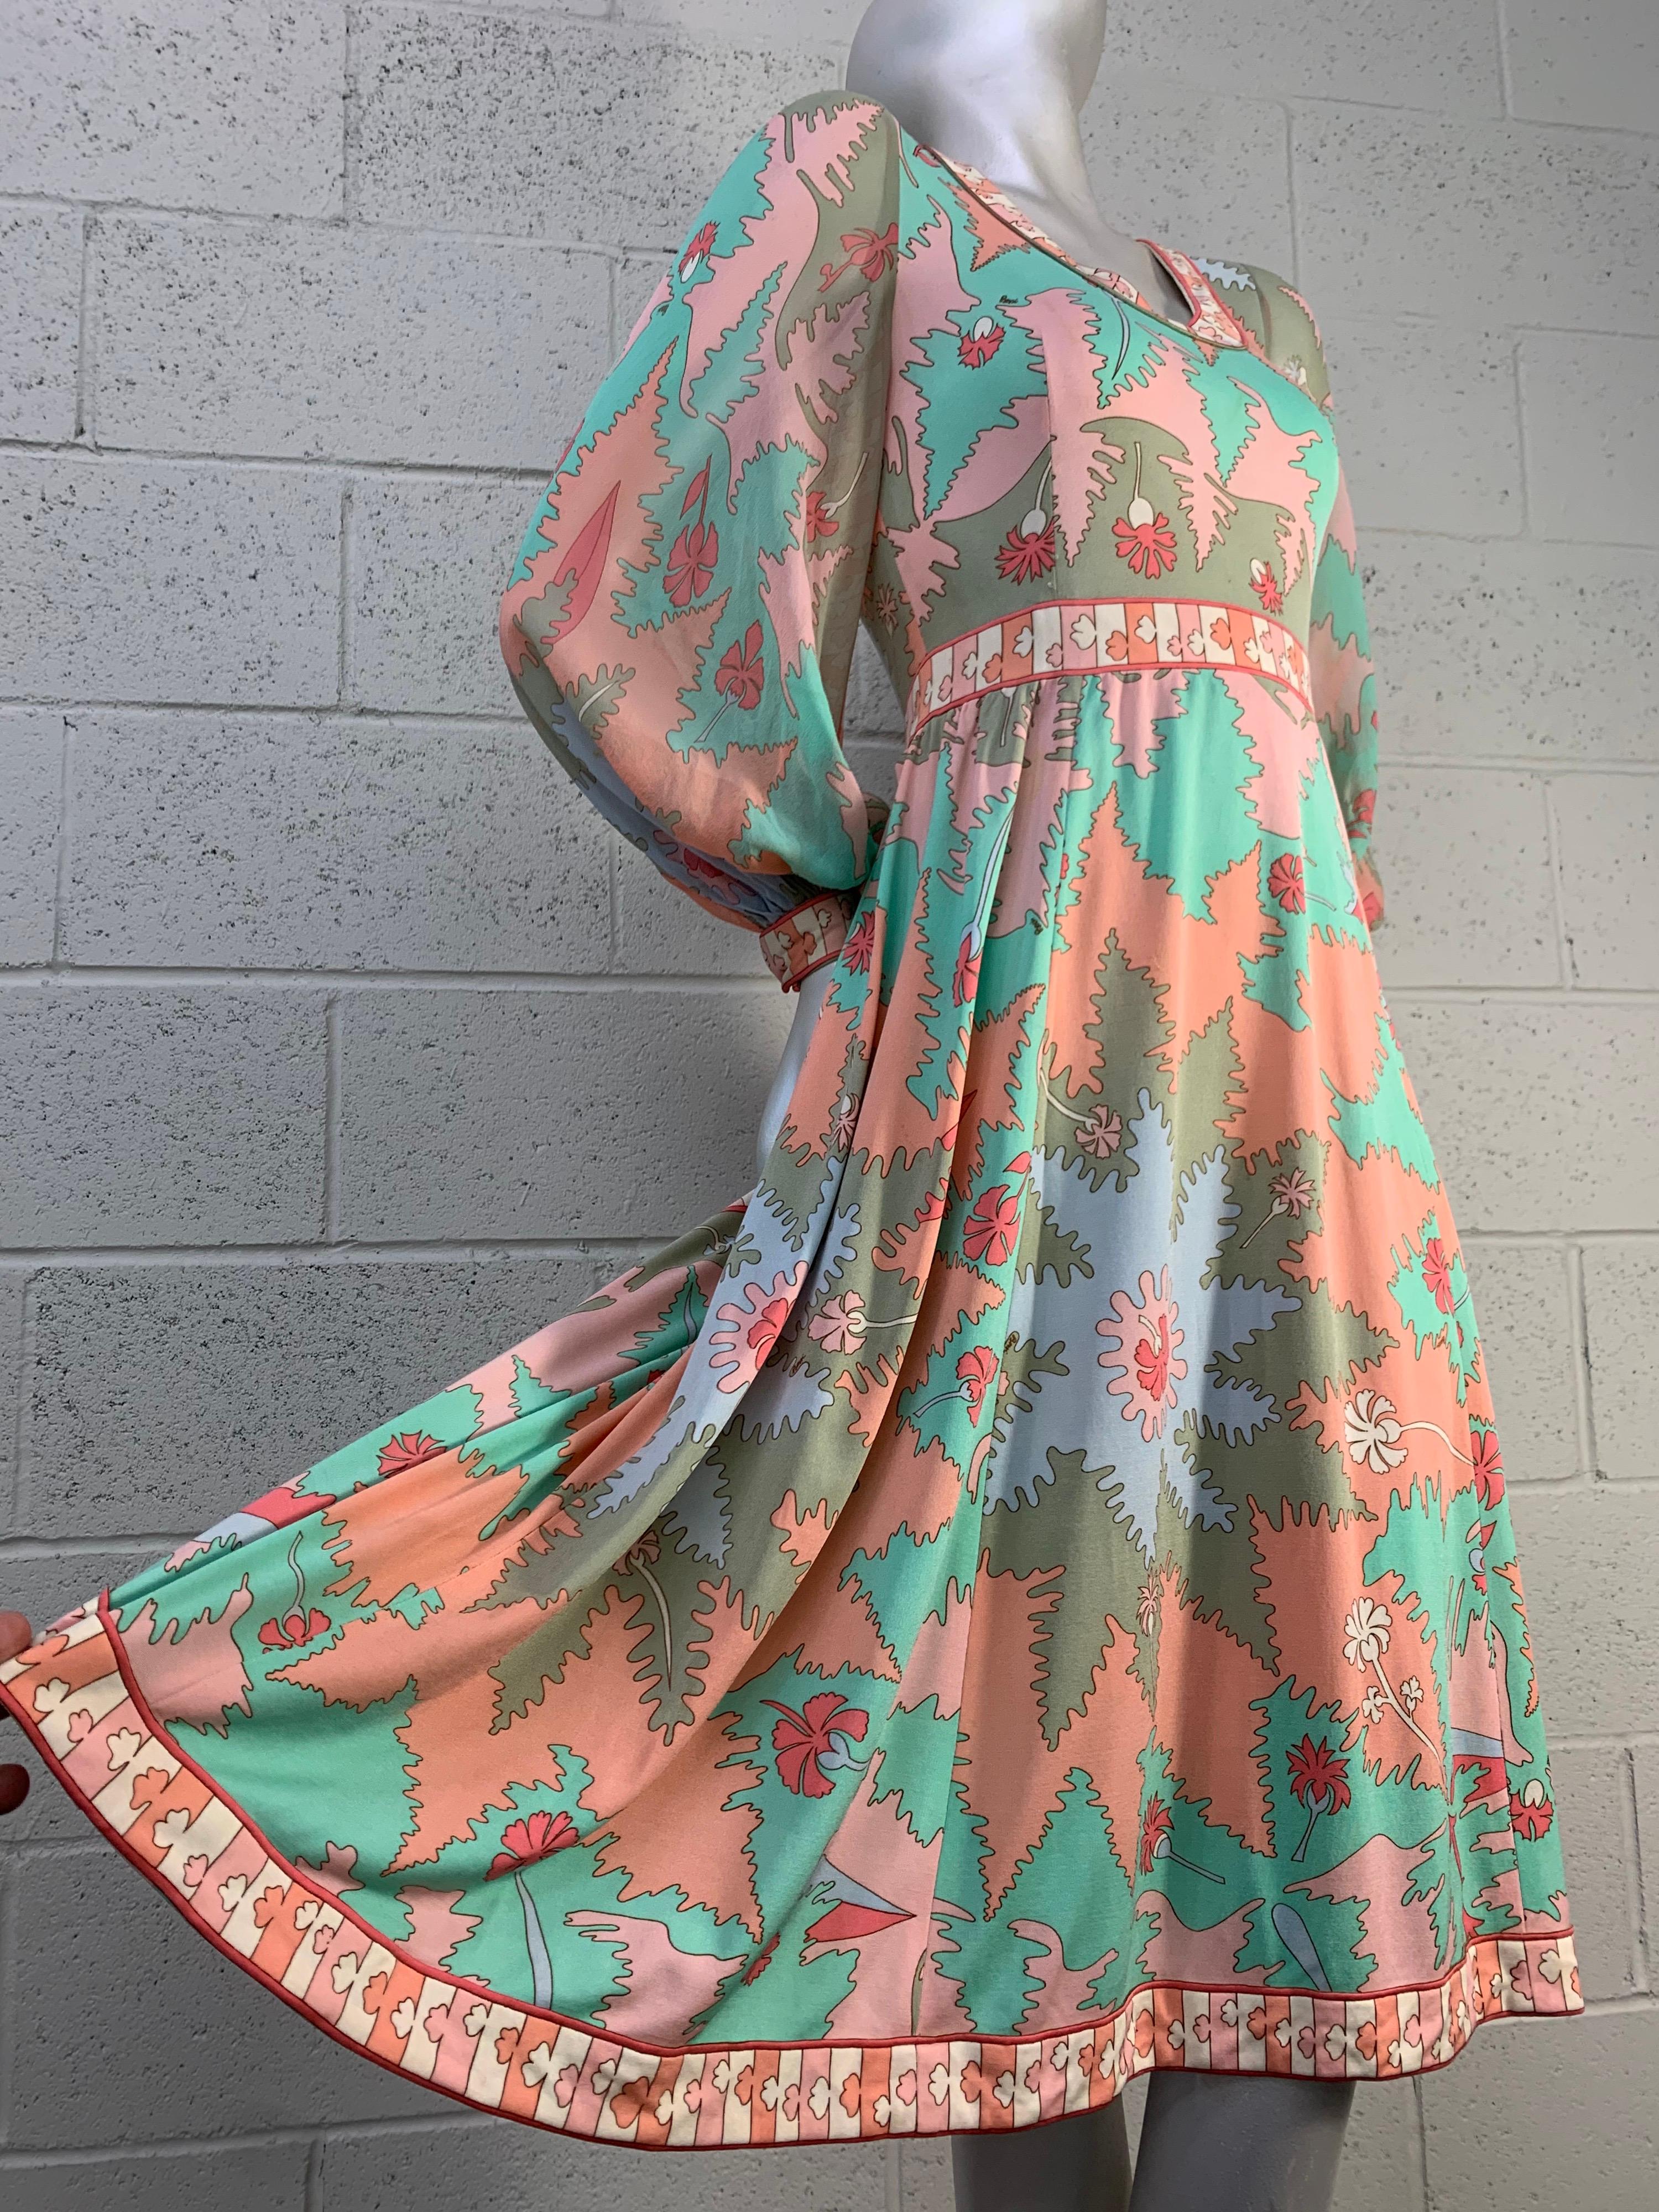 A stunning early 1970s Bessi silk jersey classic Pucci-esque print dress with chiffon balloon sleeves in shades of peach, aqua persimmon and gray. Banded waist and full skirt for a graceful silhouette. Size 4. 